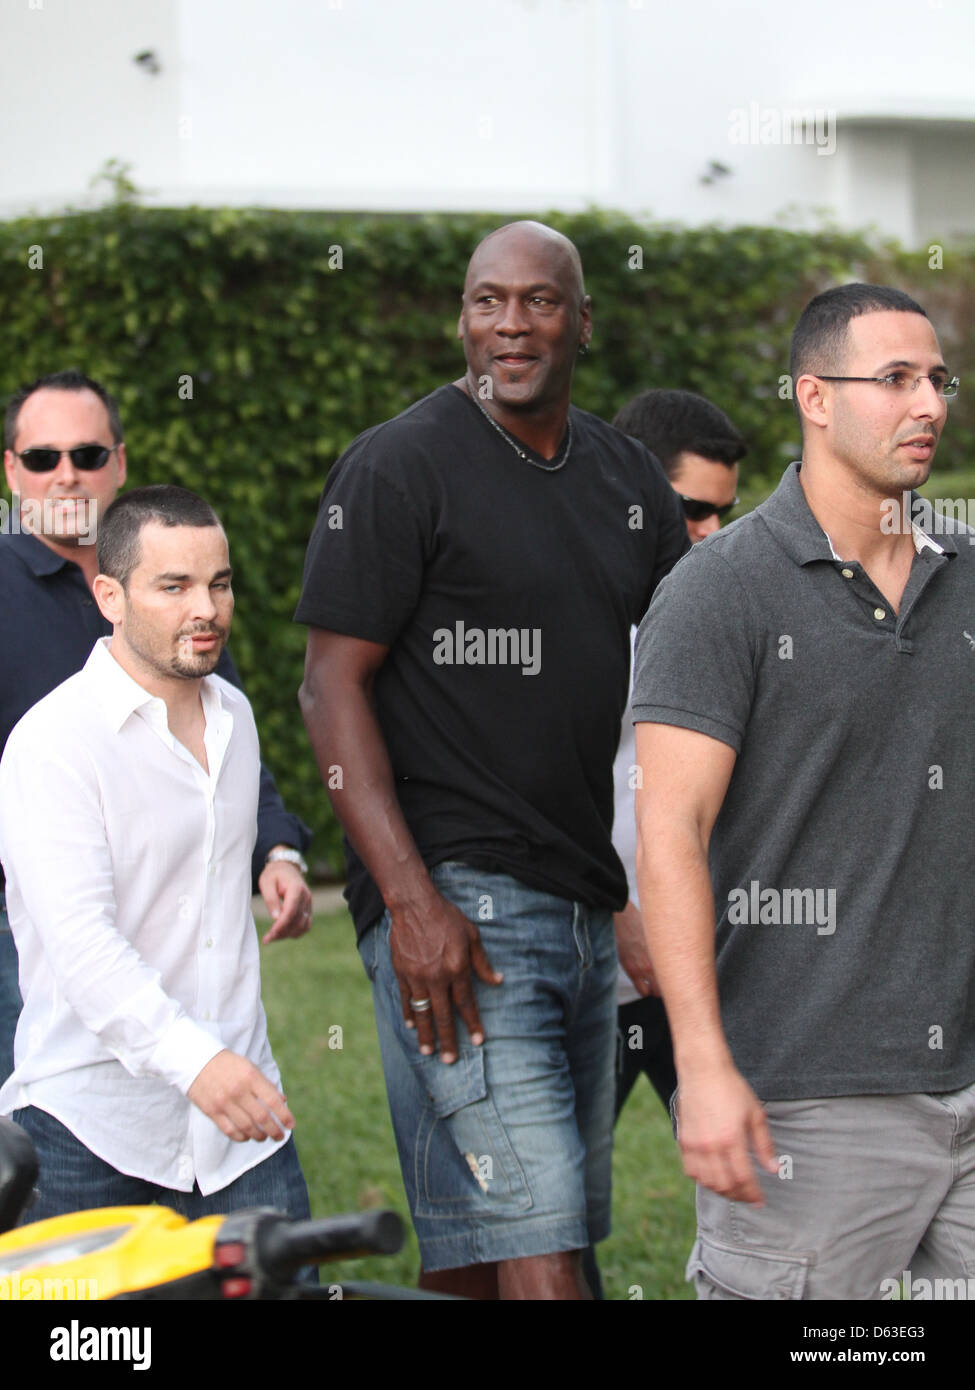 Michael Jordan out and about in Miami Miami, Florida - 19.12.11 Stock Photo  - Alamy